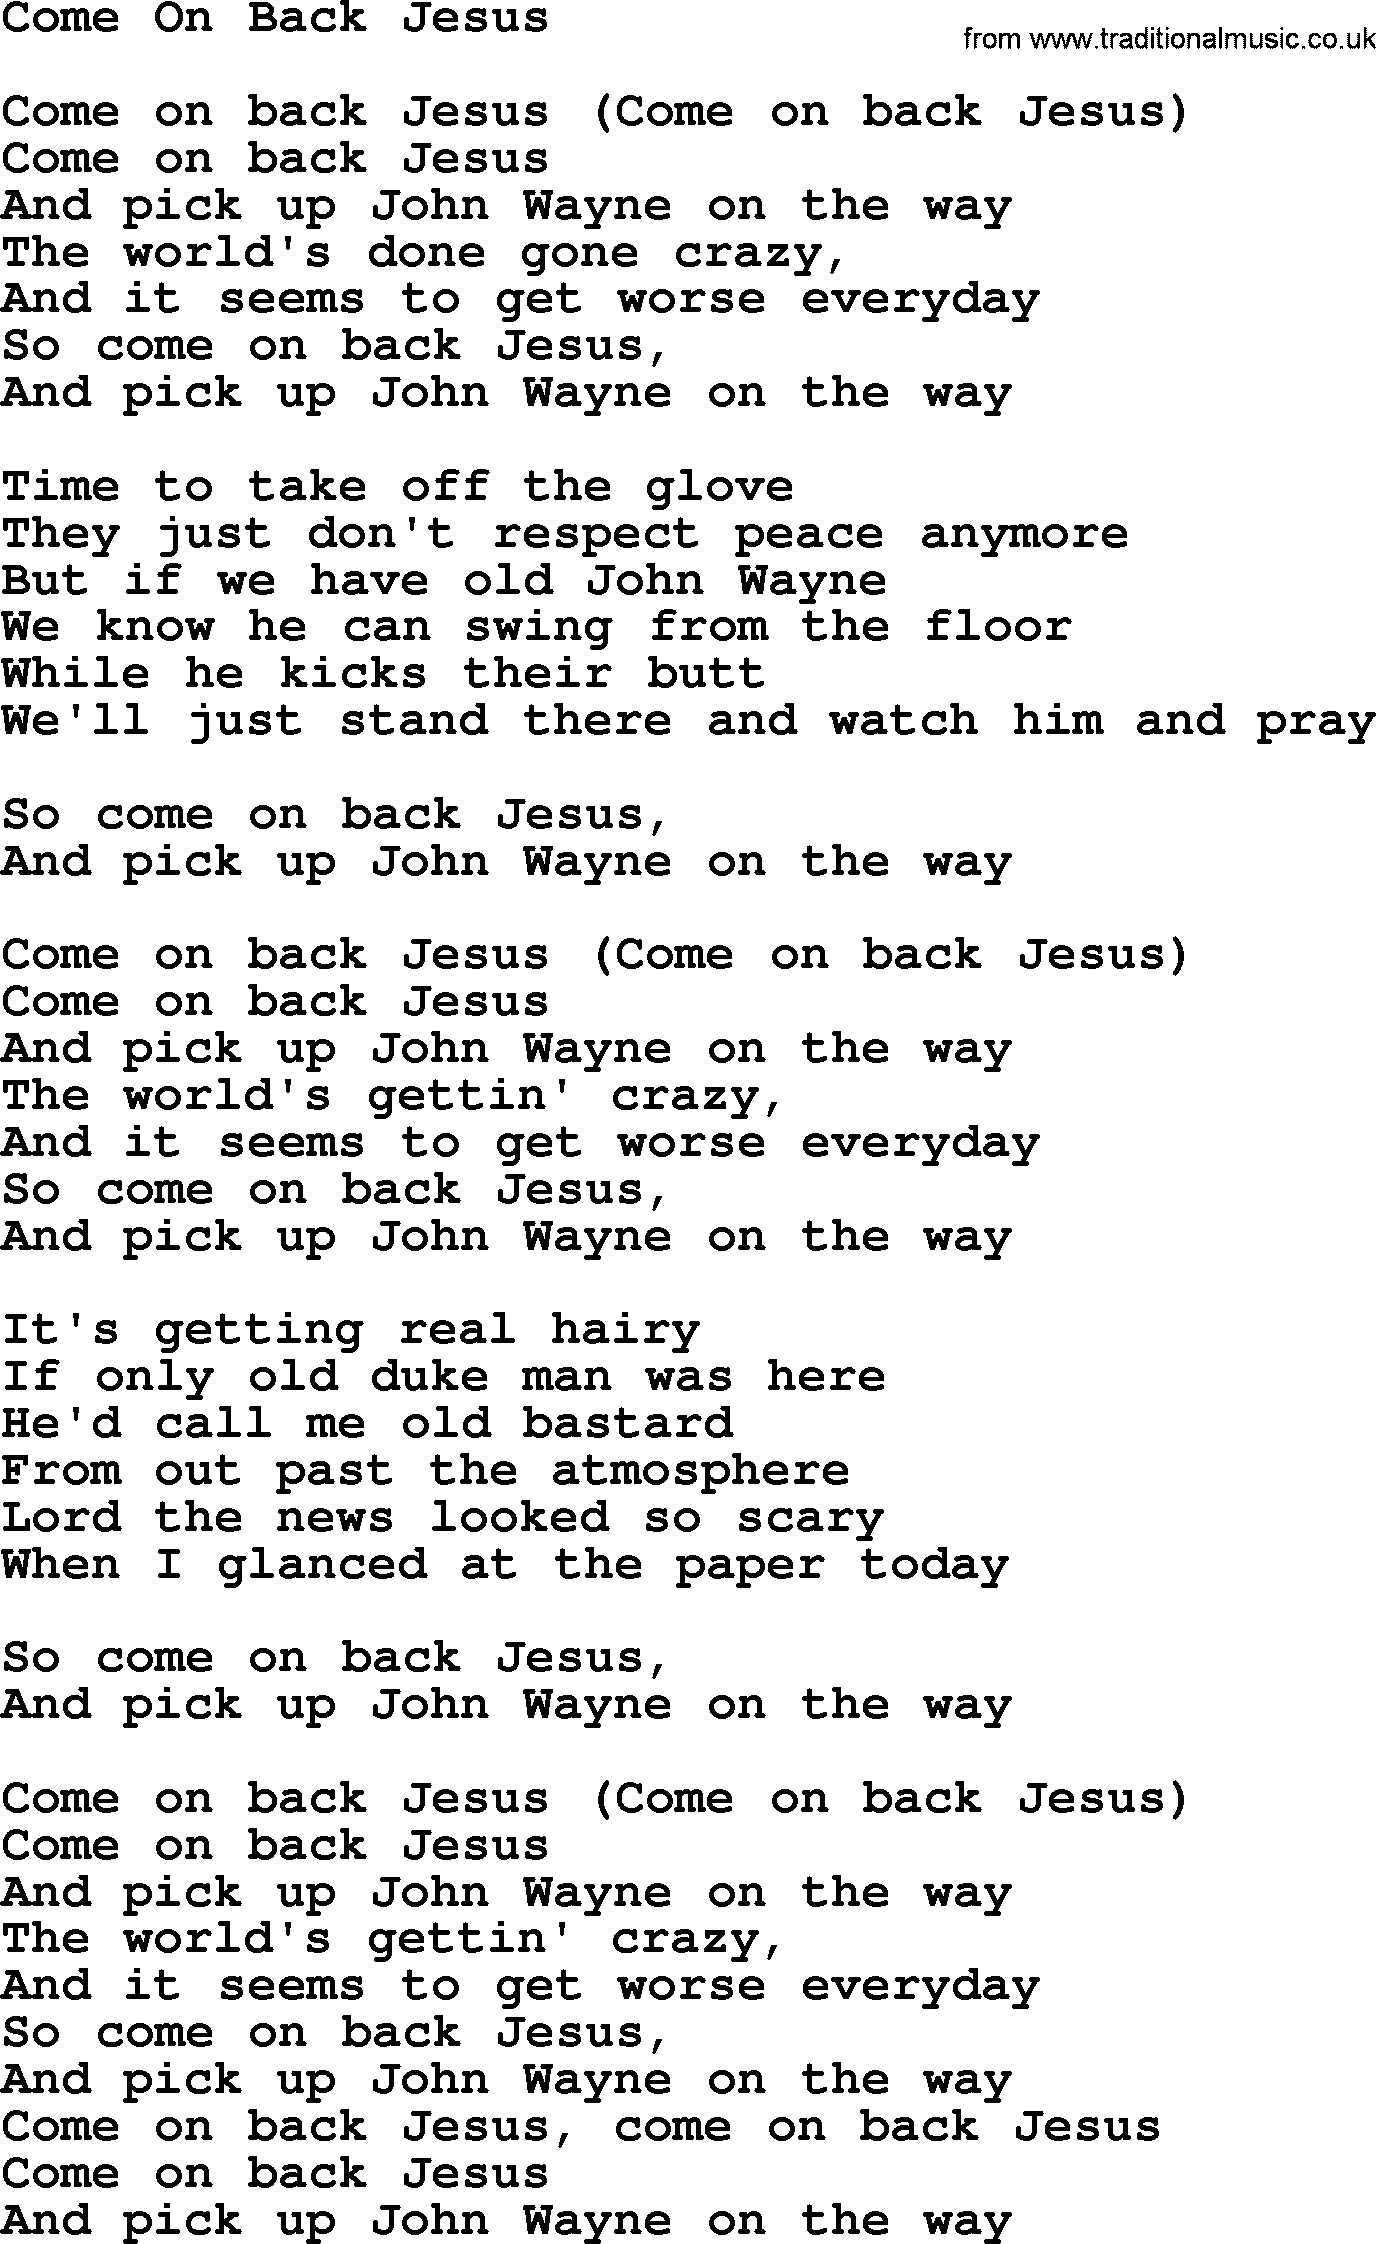 Willie Nelson song: Come On Back Jesus lyrics